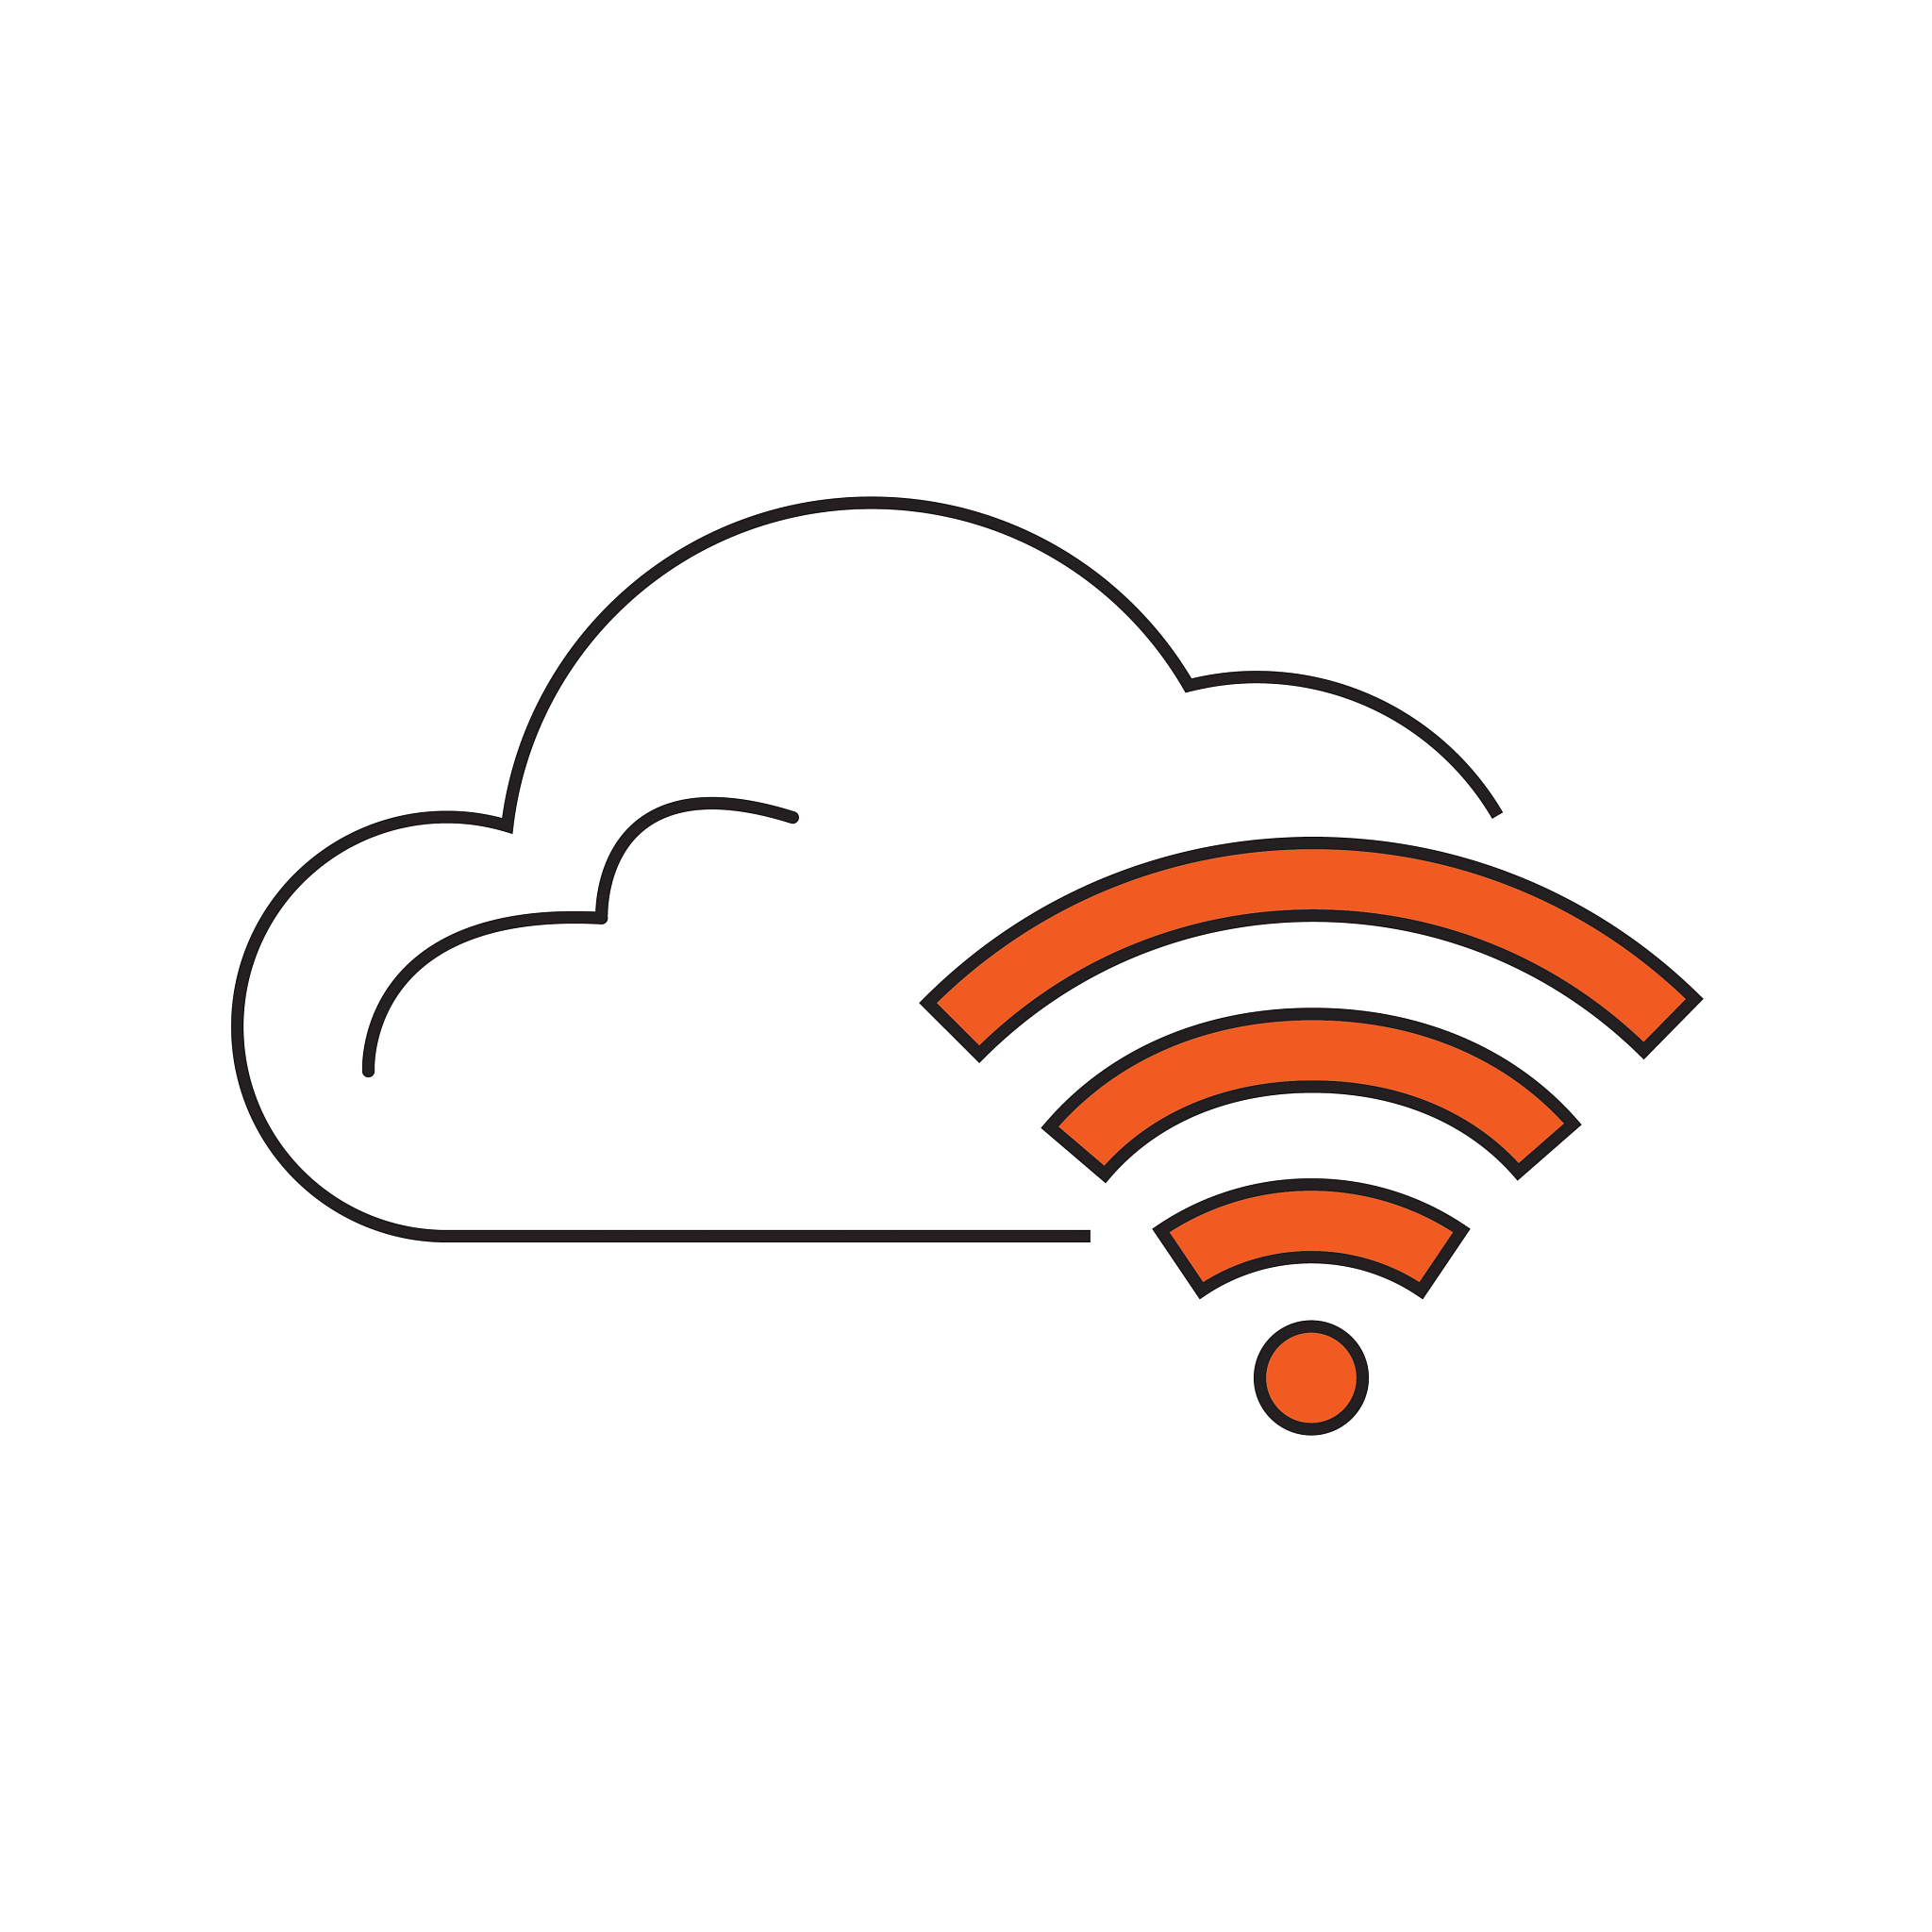 Do you have a Wi-Fi network where your collections are located that can support remote monitoring?